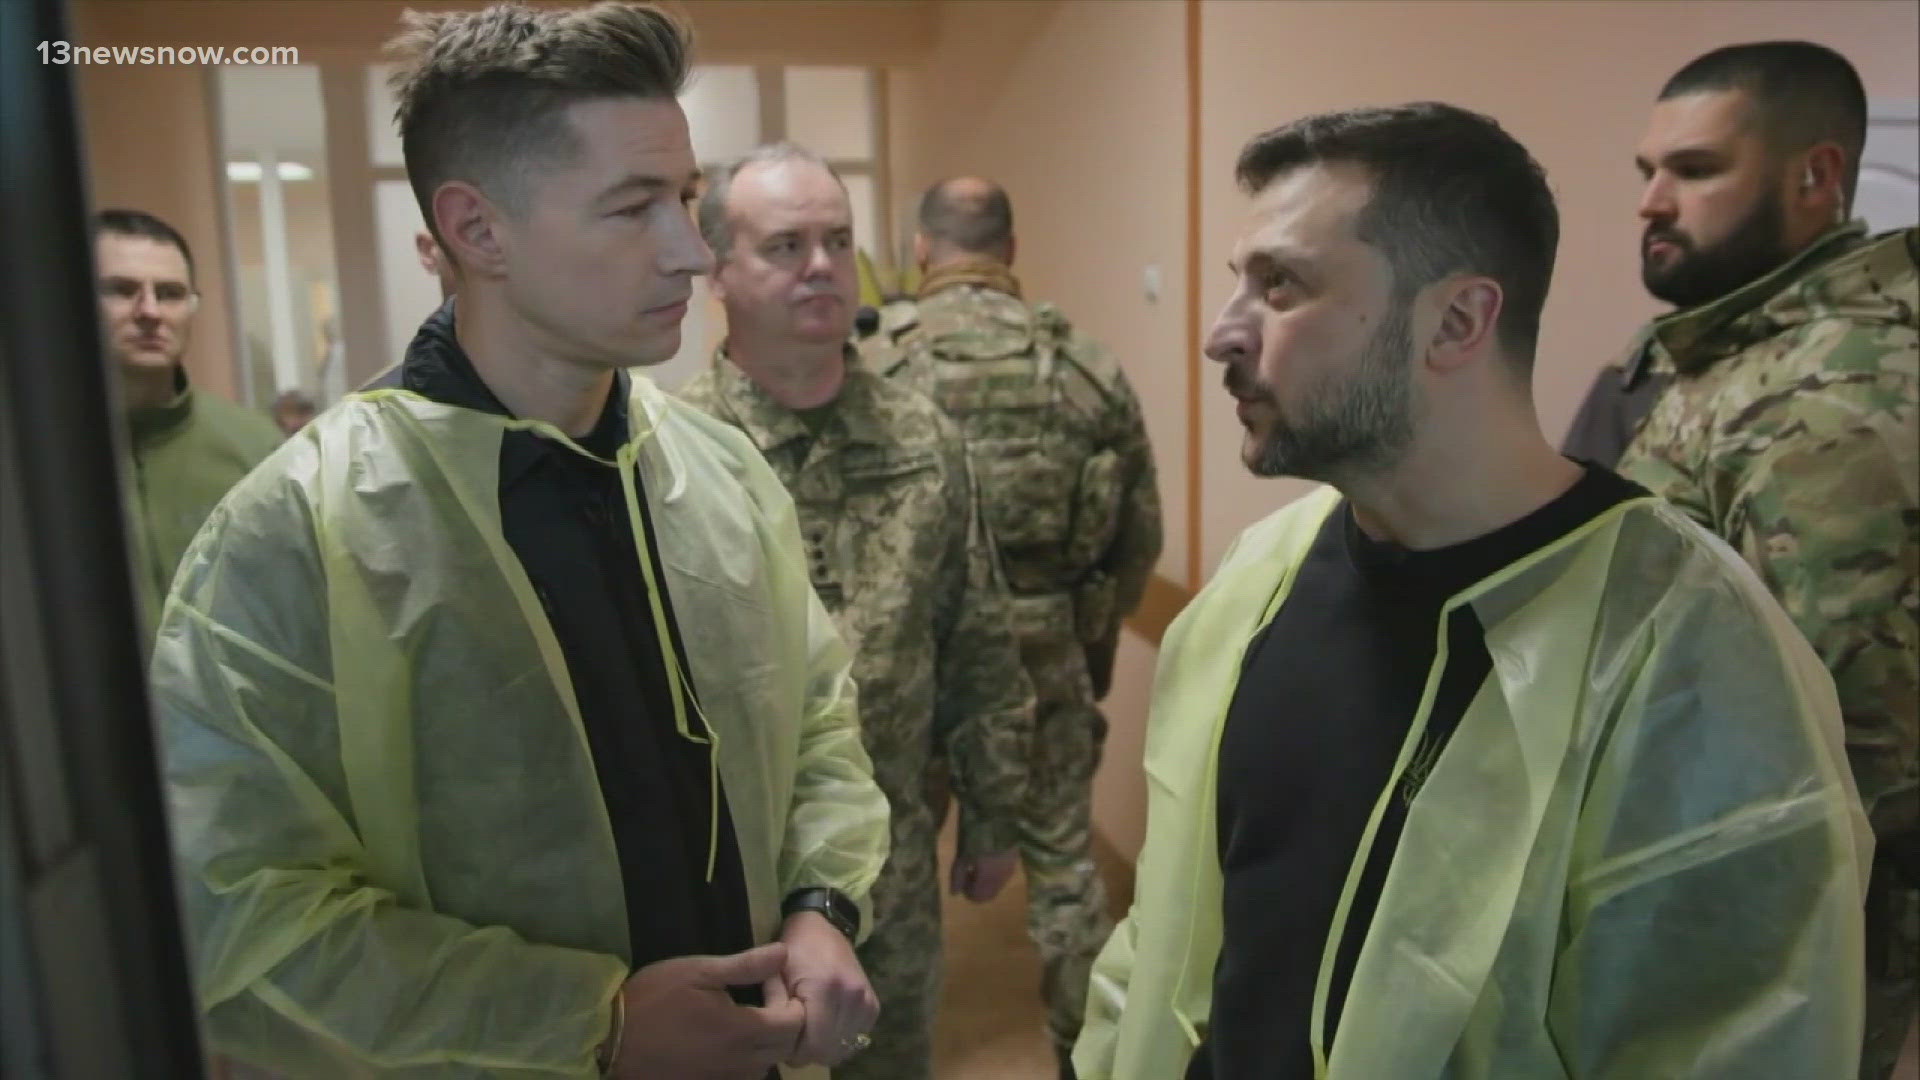 The situation in Ukraine has become so dire that President Zelenskyy canceled a foreign trip to meet injured soldiers.